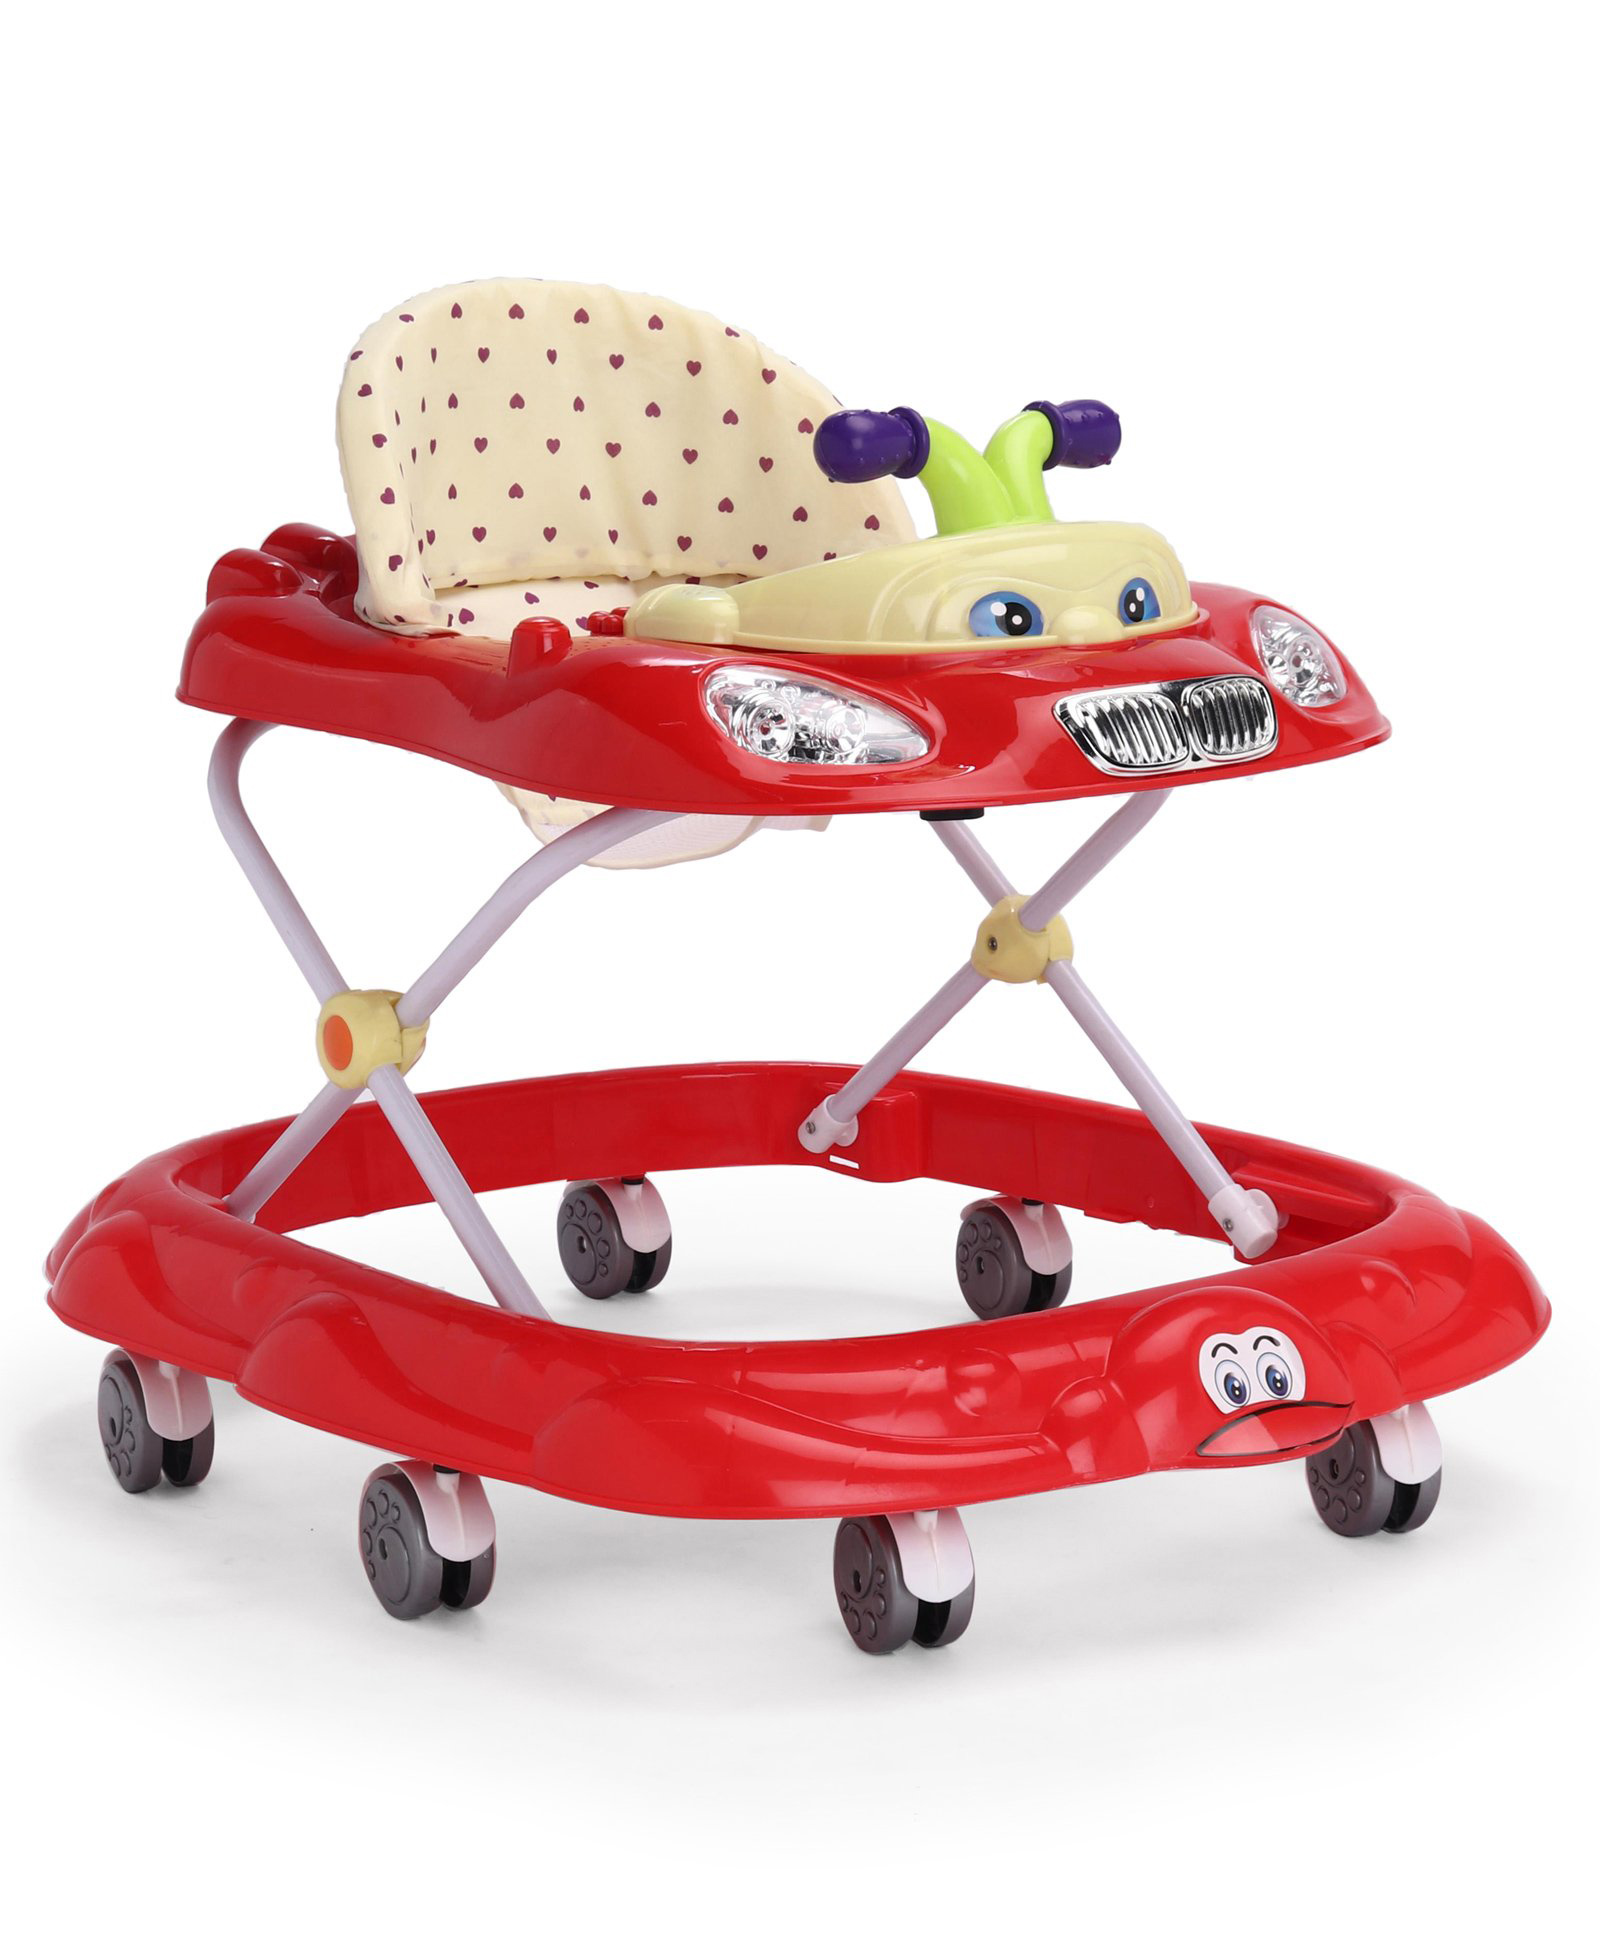 baby walker on firstcry